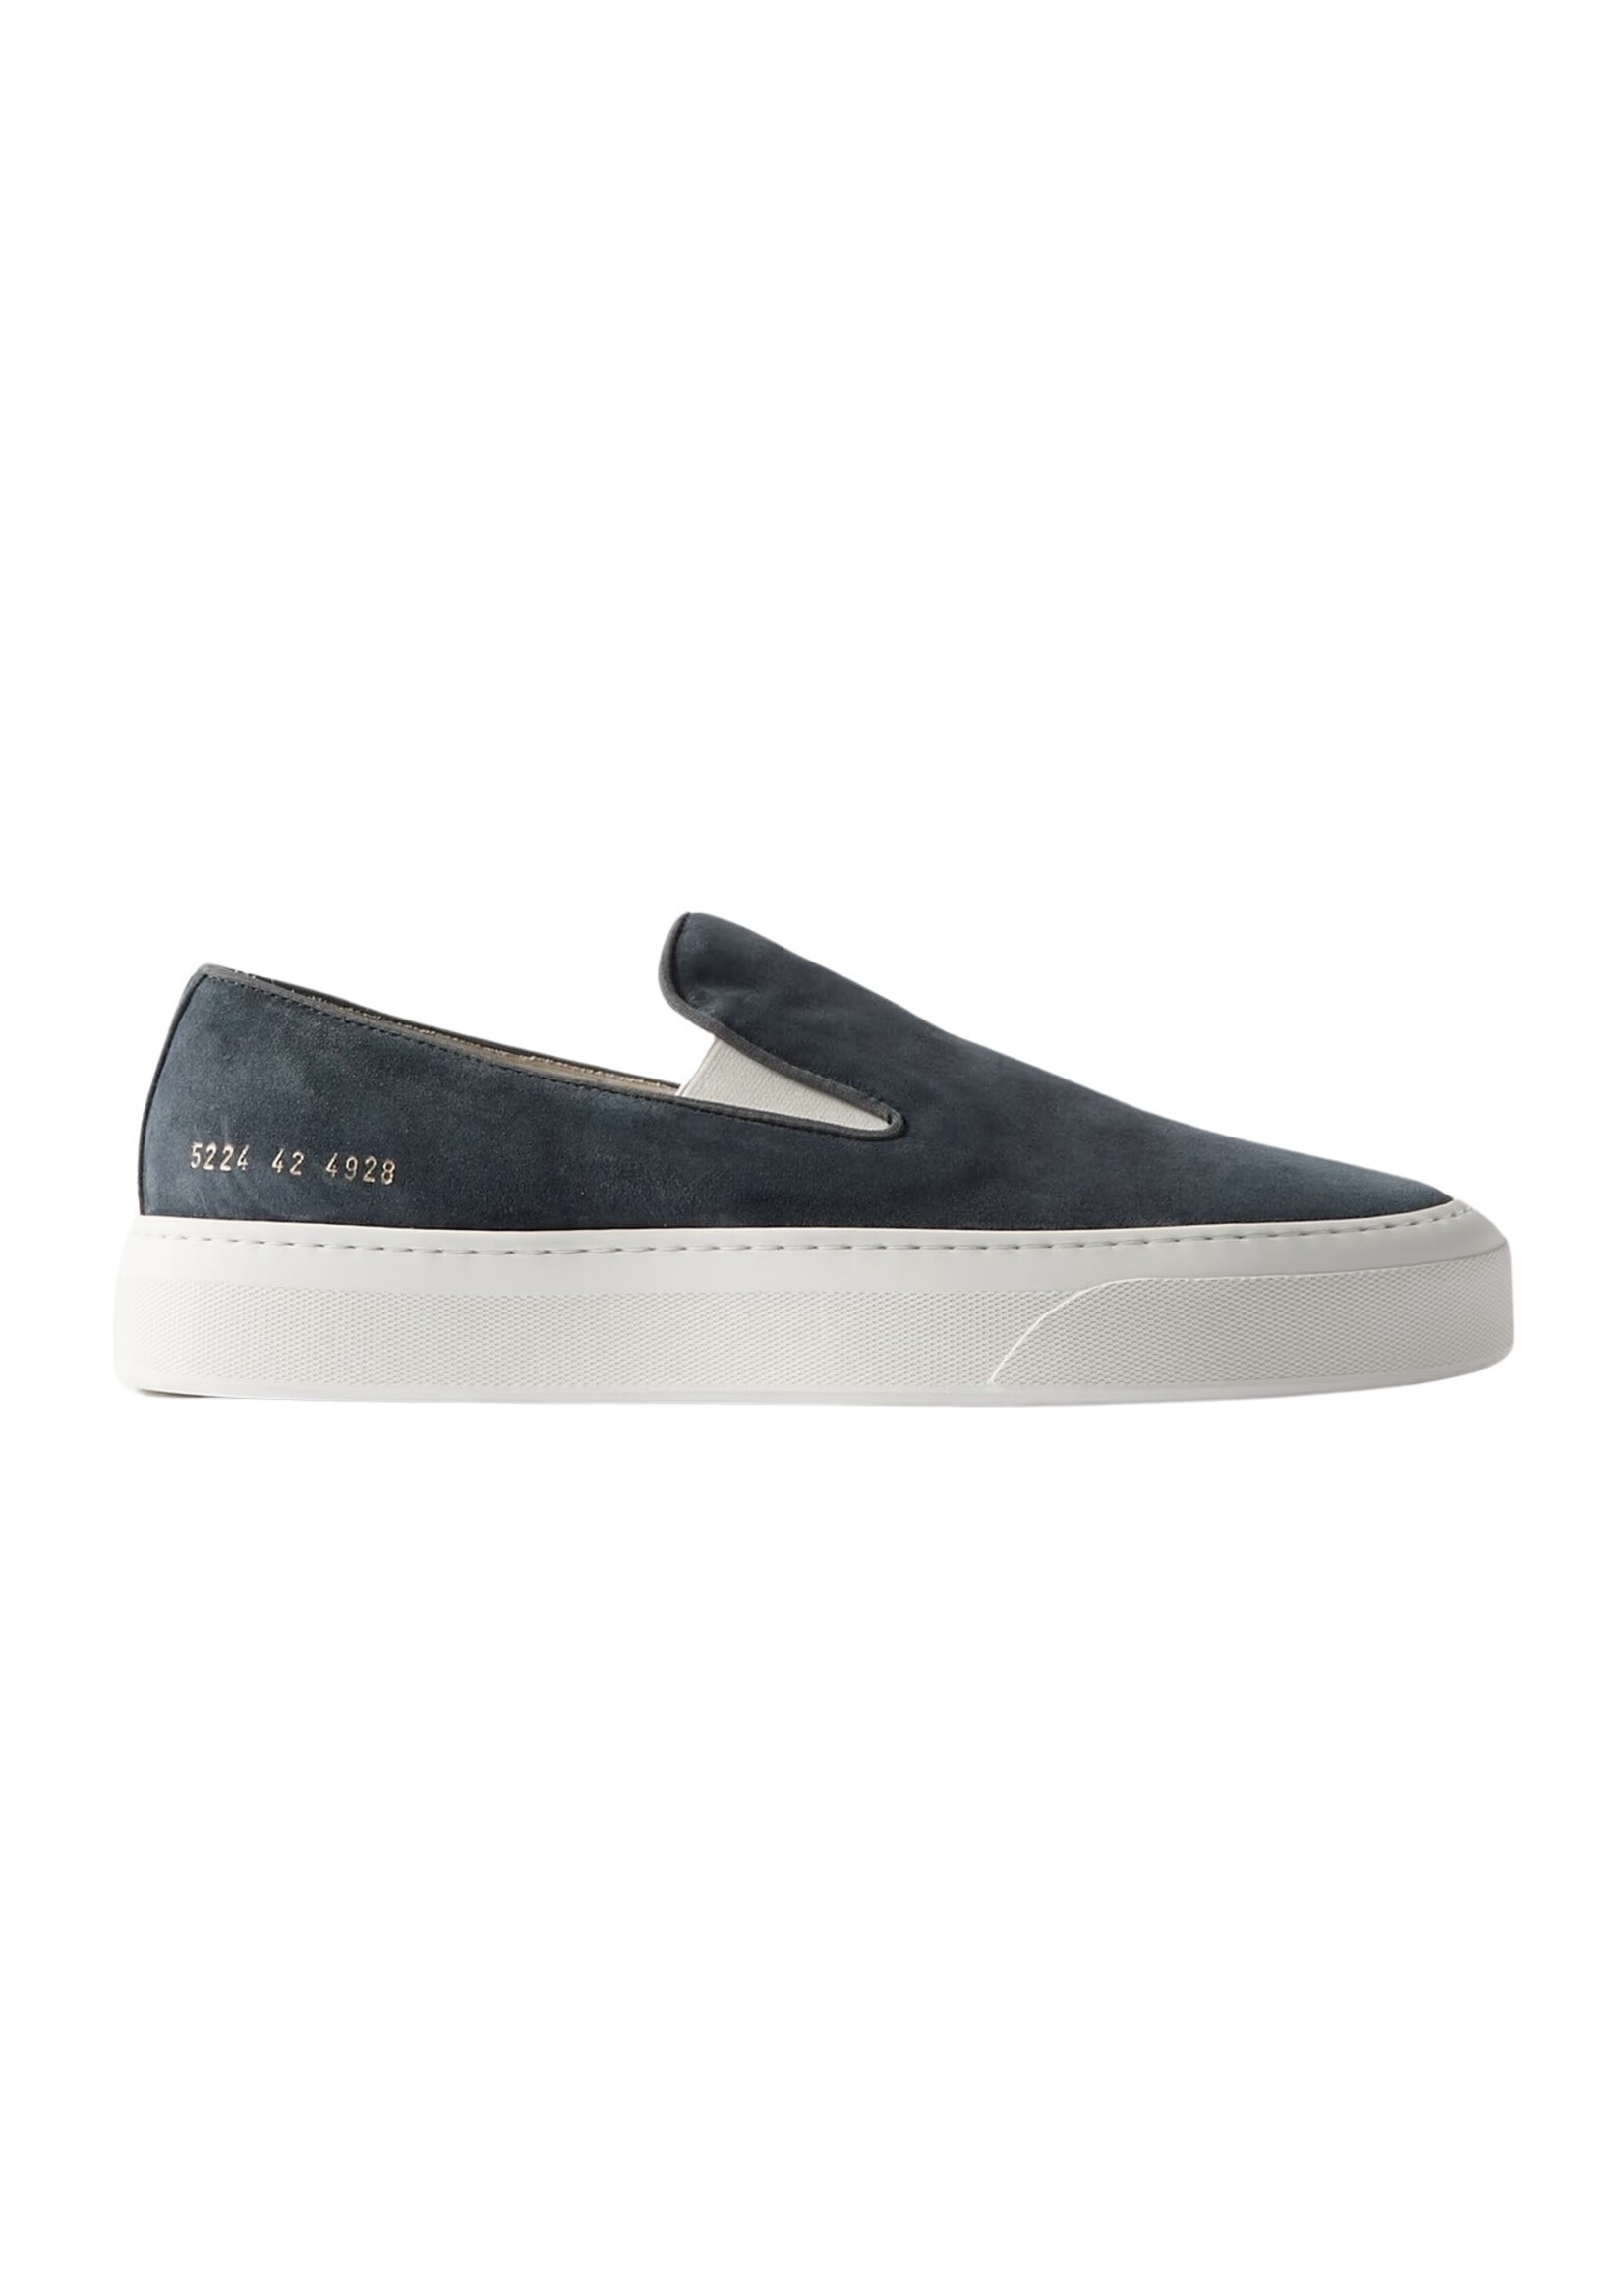 COMMON PROJECTS SLIP ON SUEDE SNEAKER